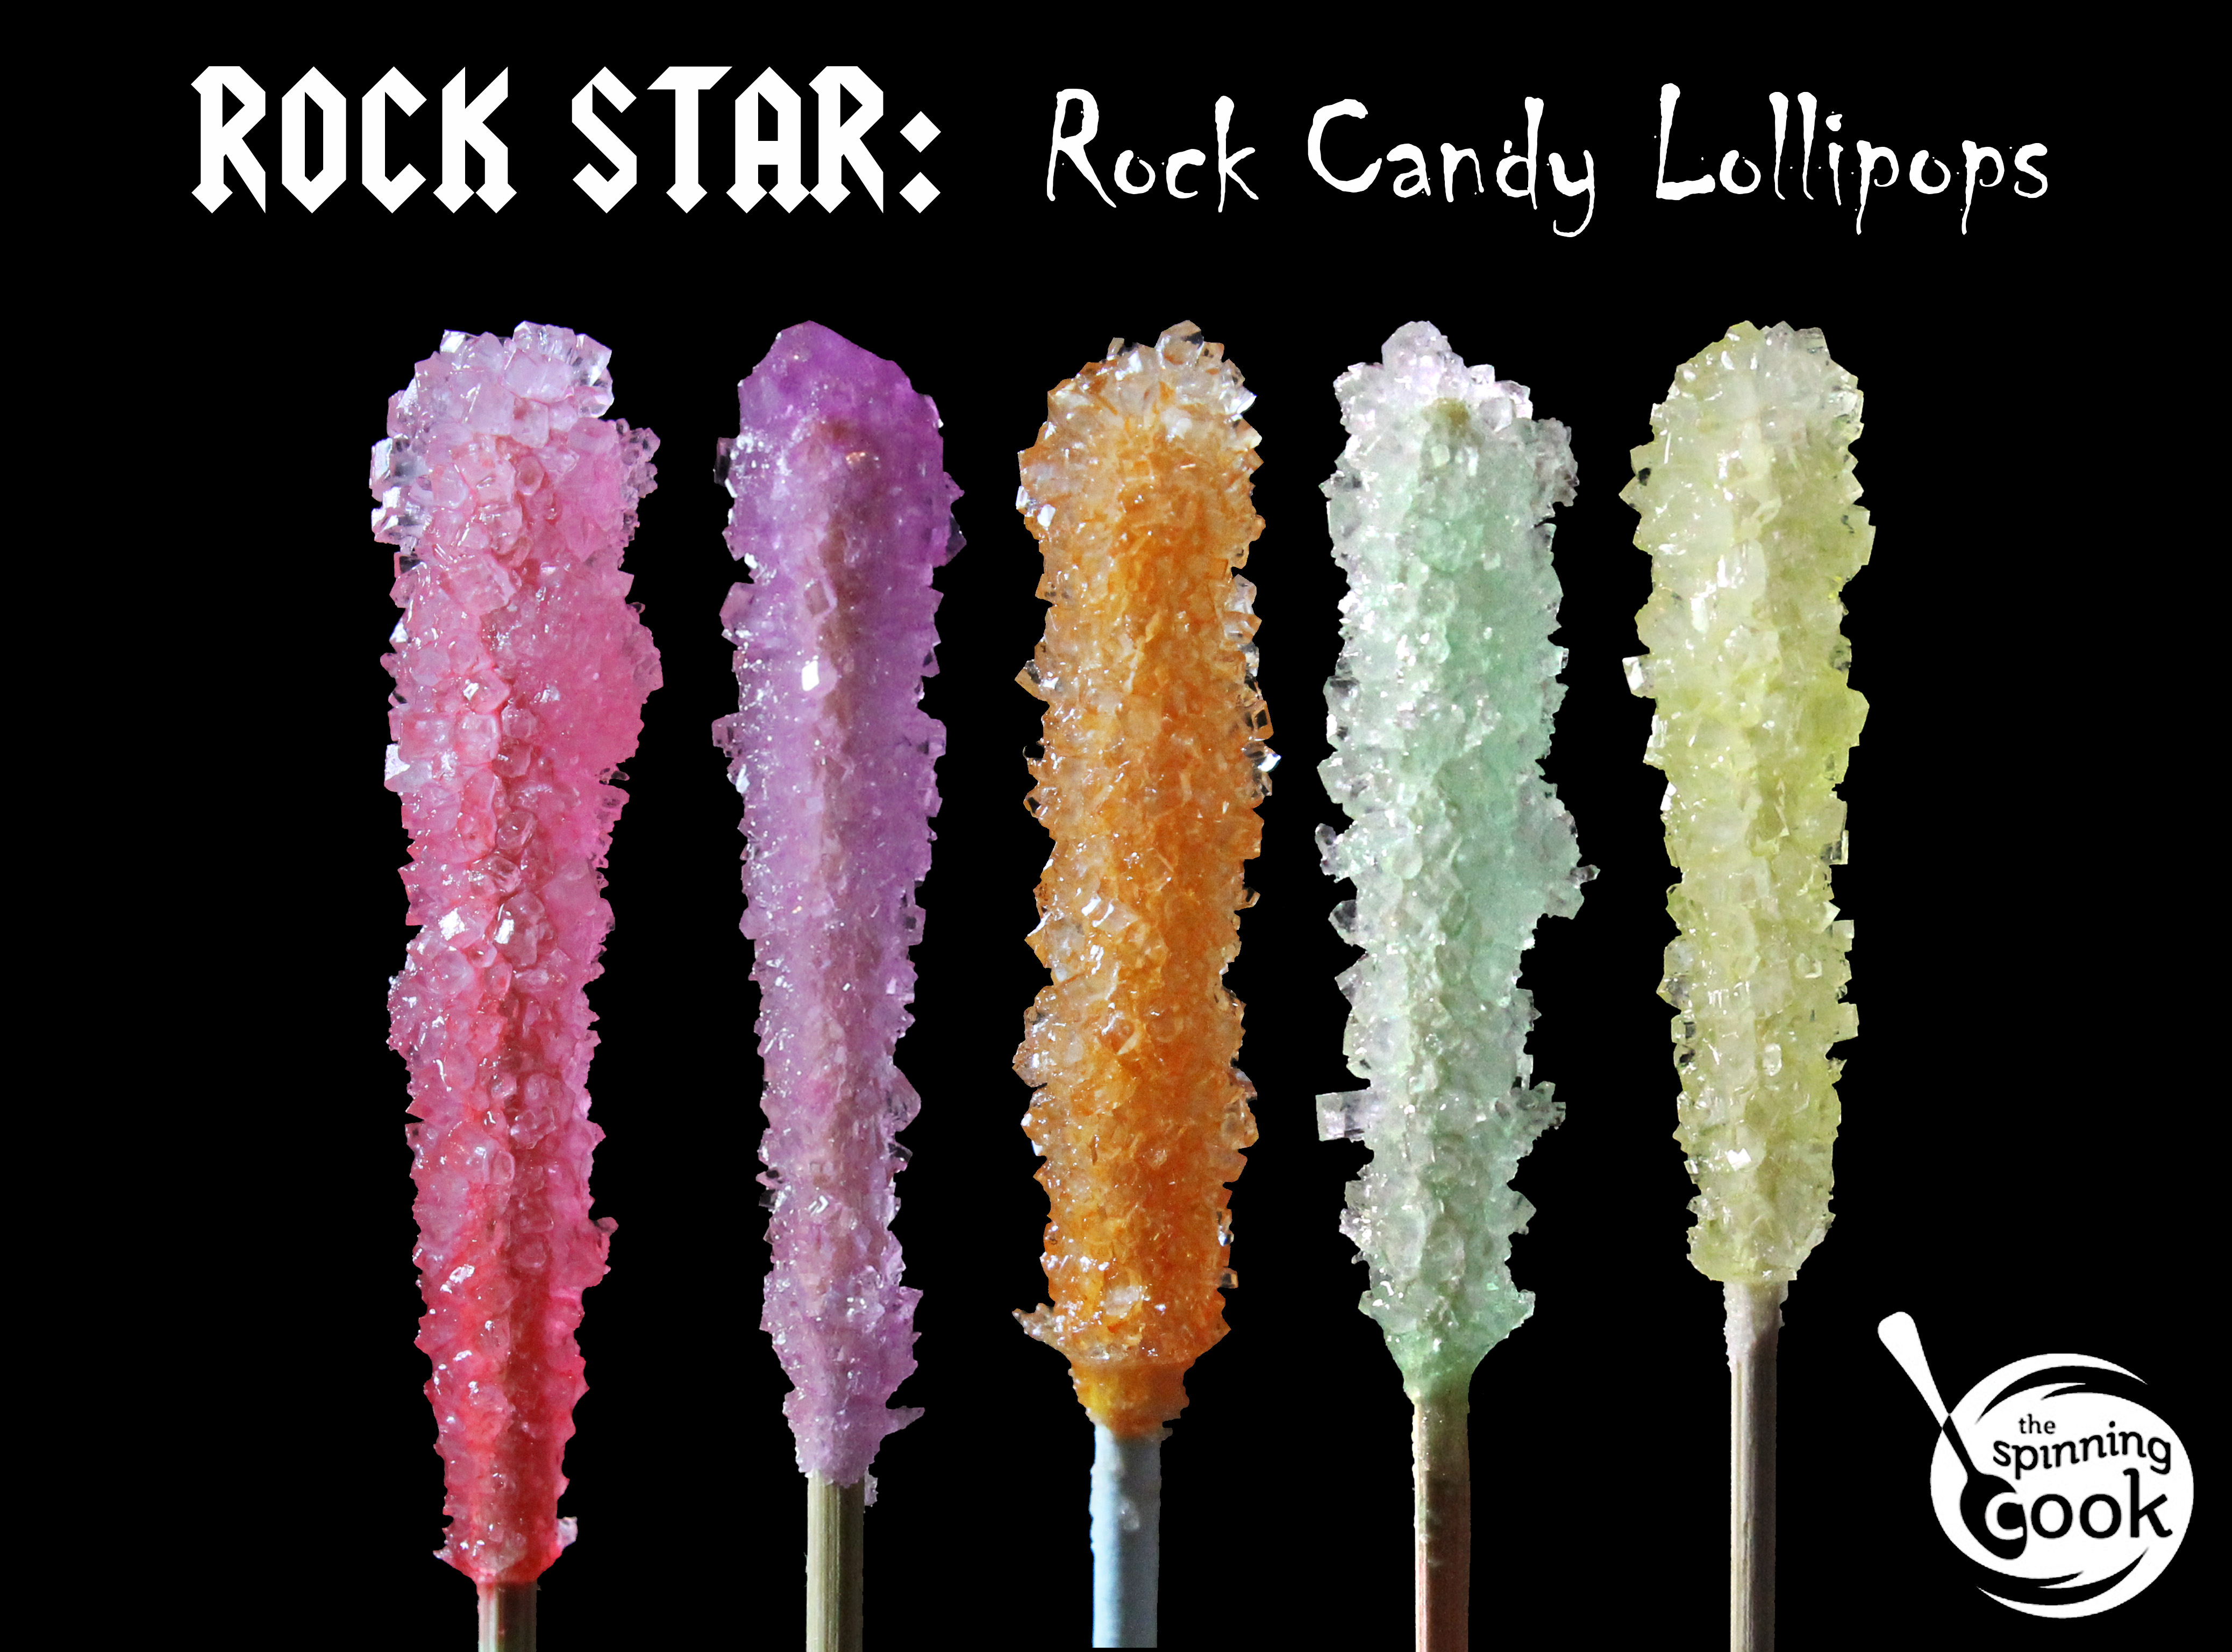 Rock Candy Lollipops Recipe Spinning Cook,Smoked Sausage Recipes With Potatoes And Peppers